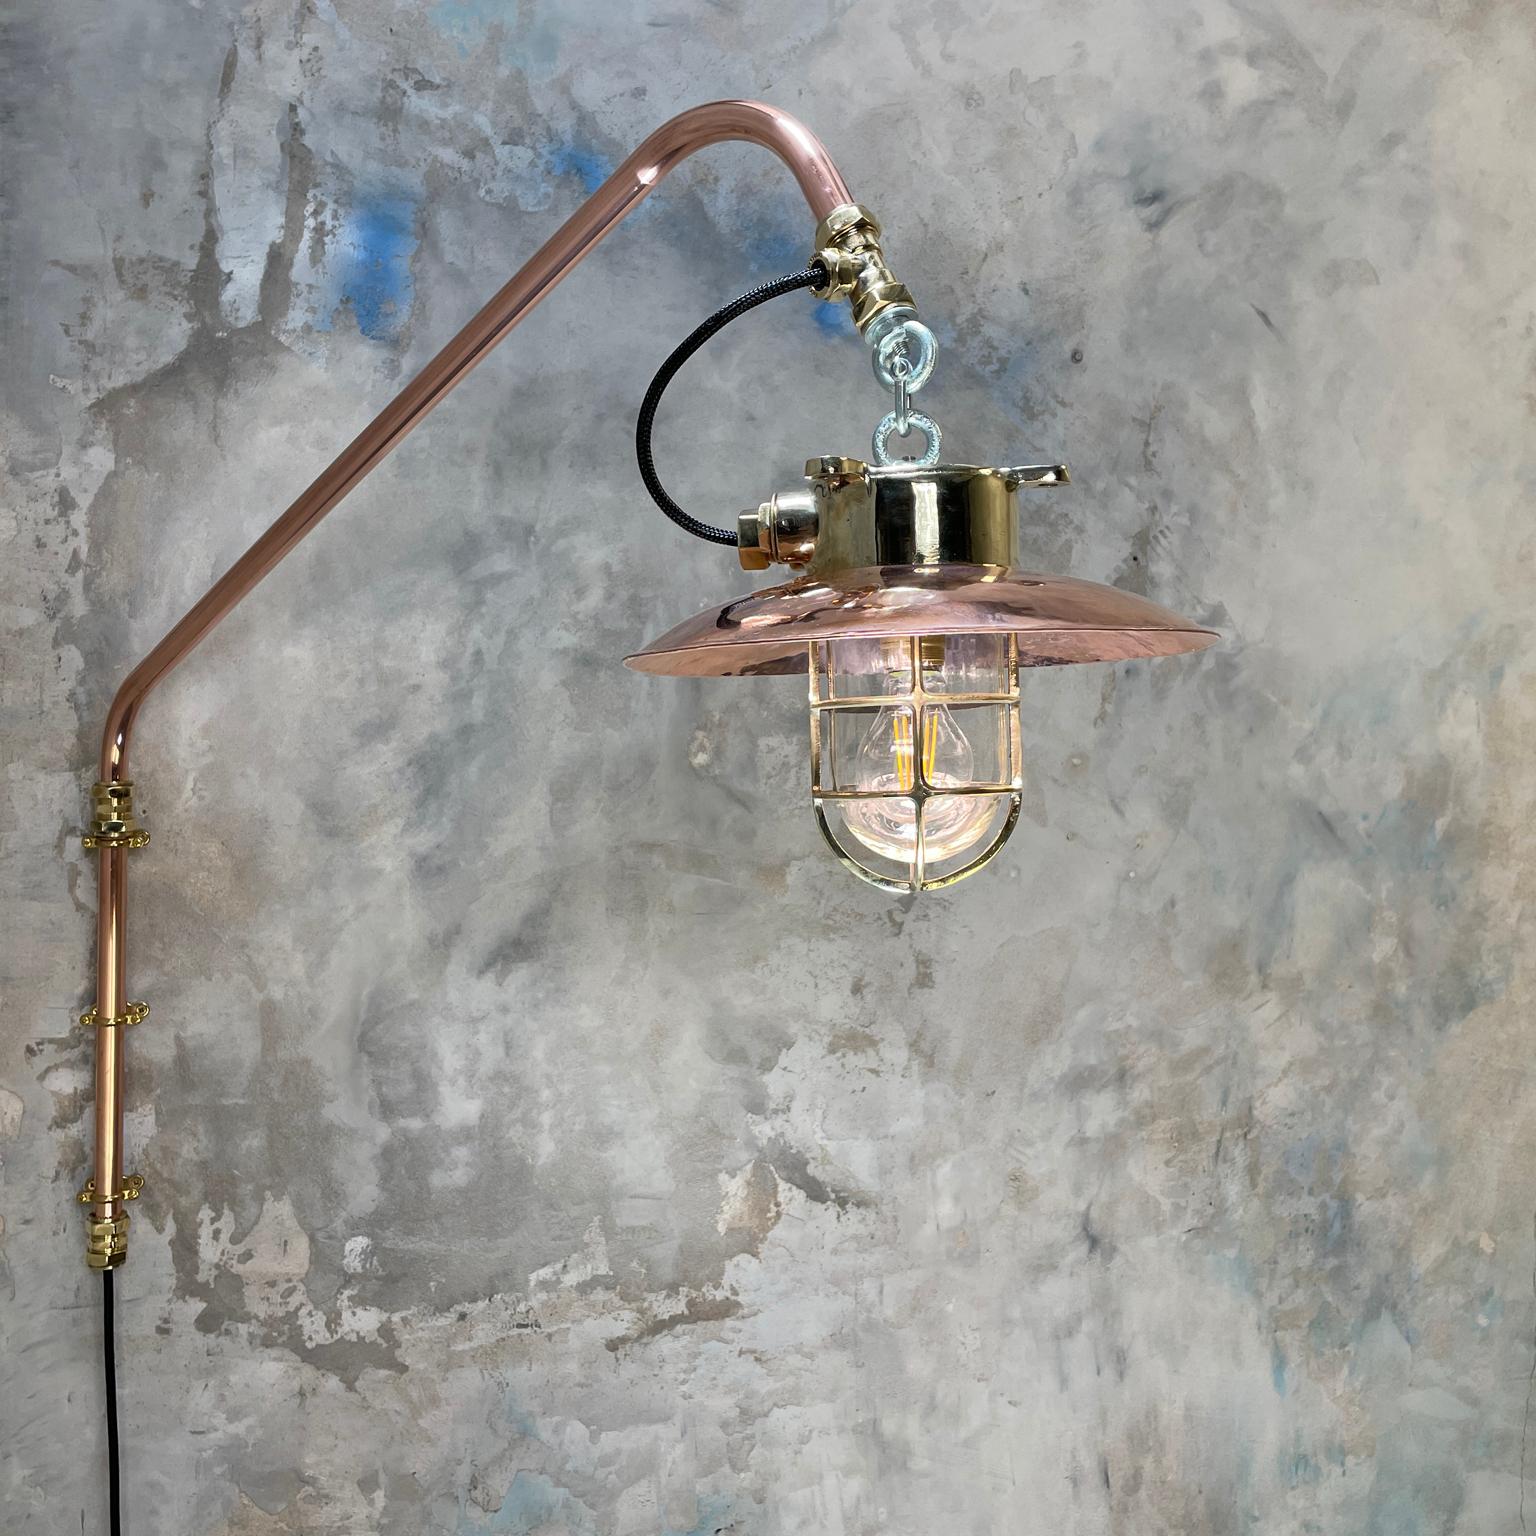 1970s Copper & Brass Cantilever Explosion Proof Pendant Lamp with Cage and Shade For Sale 8